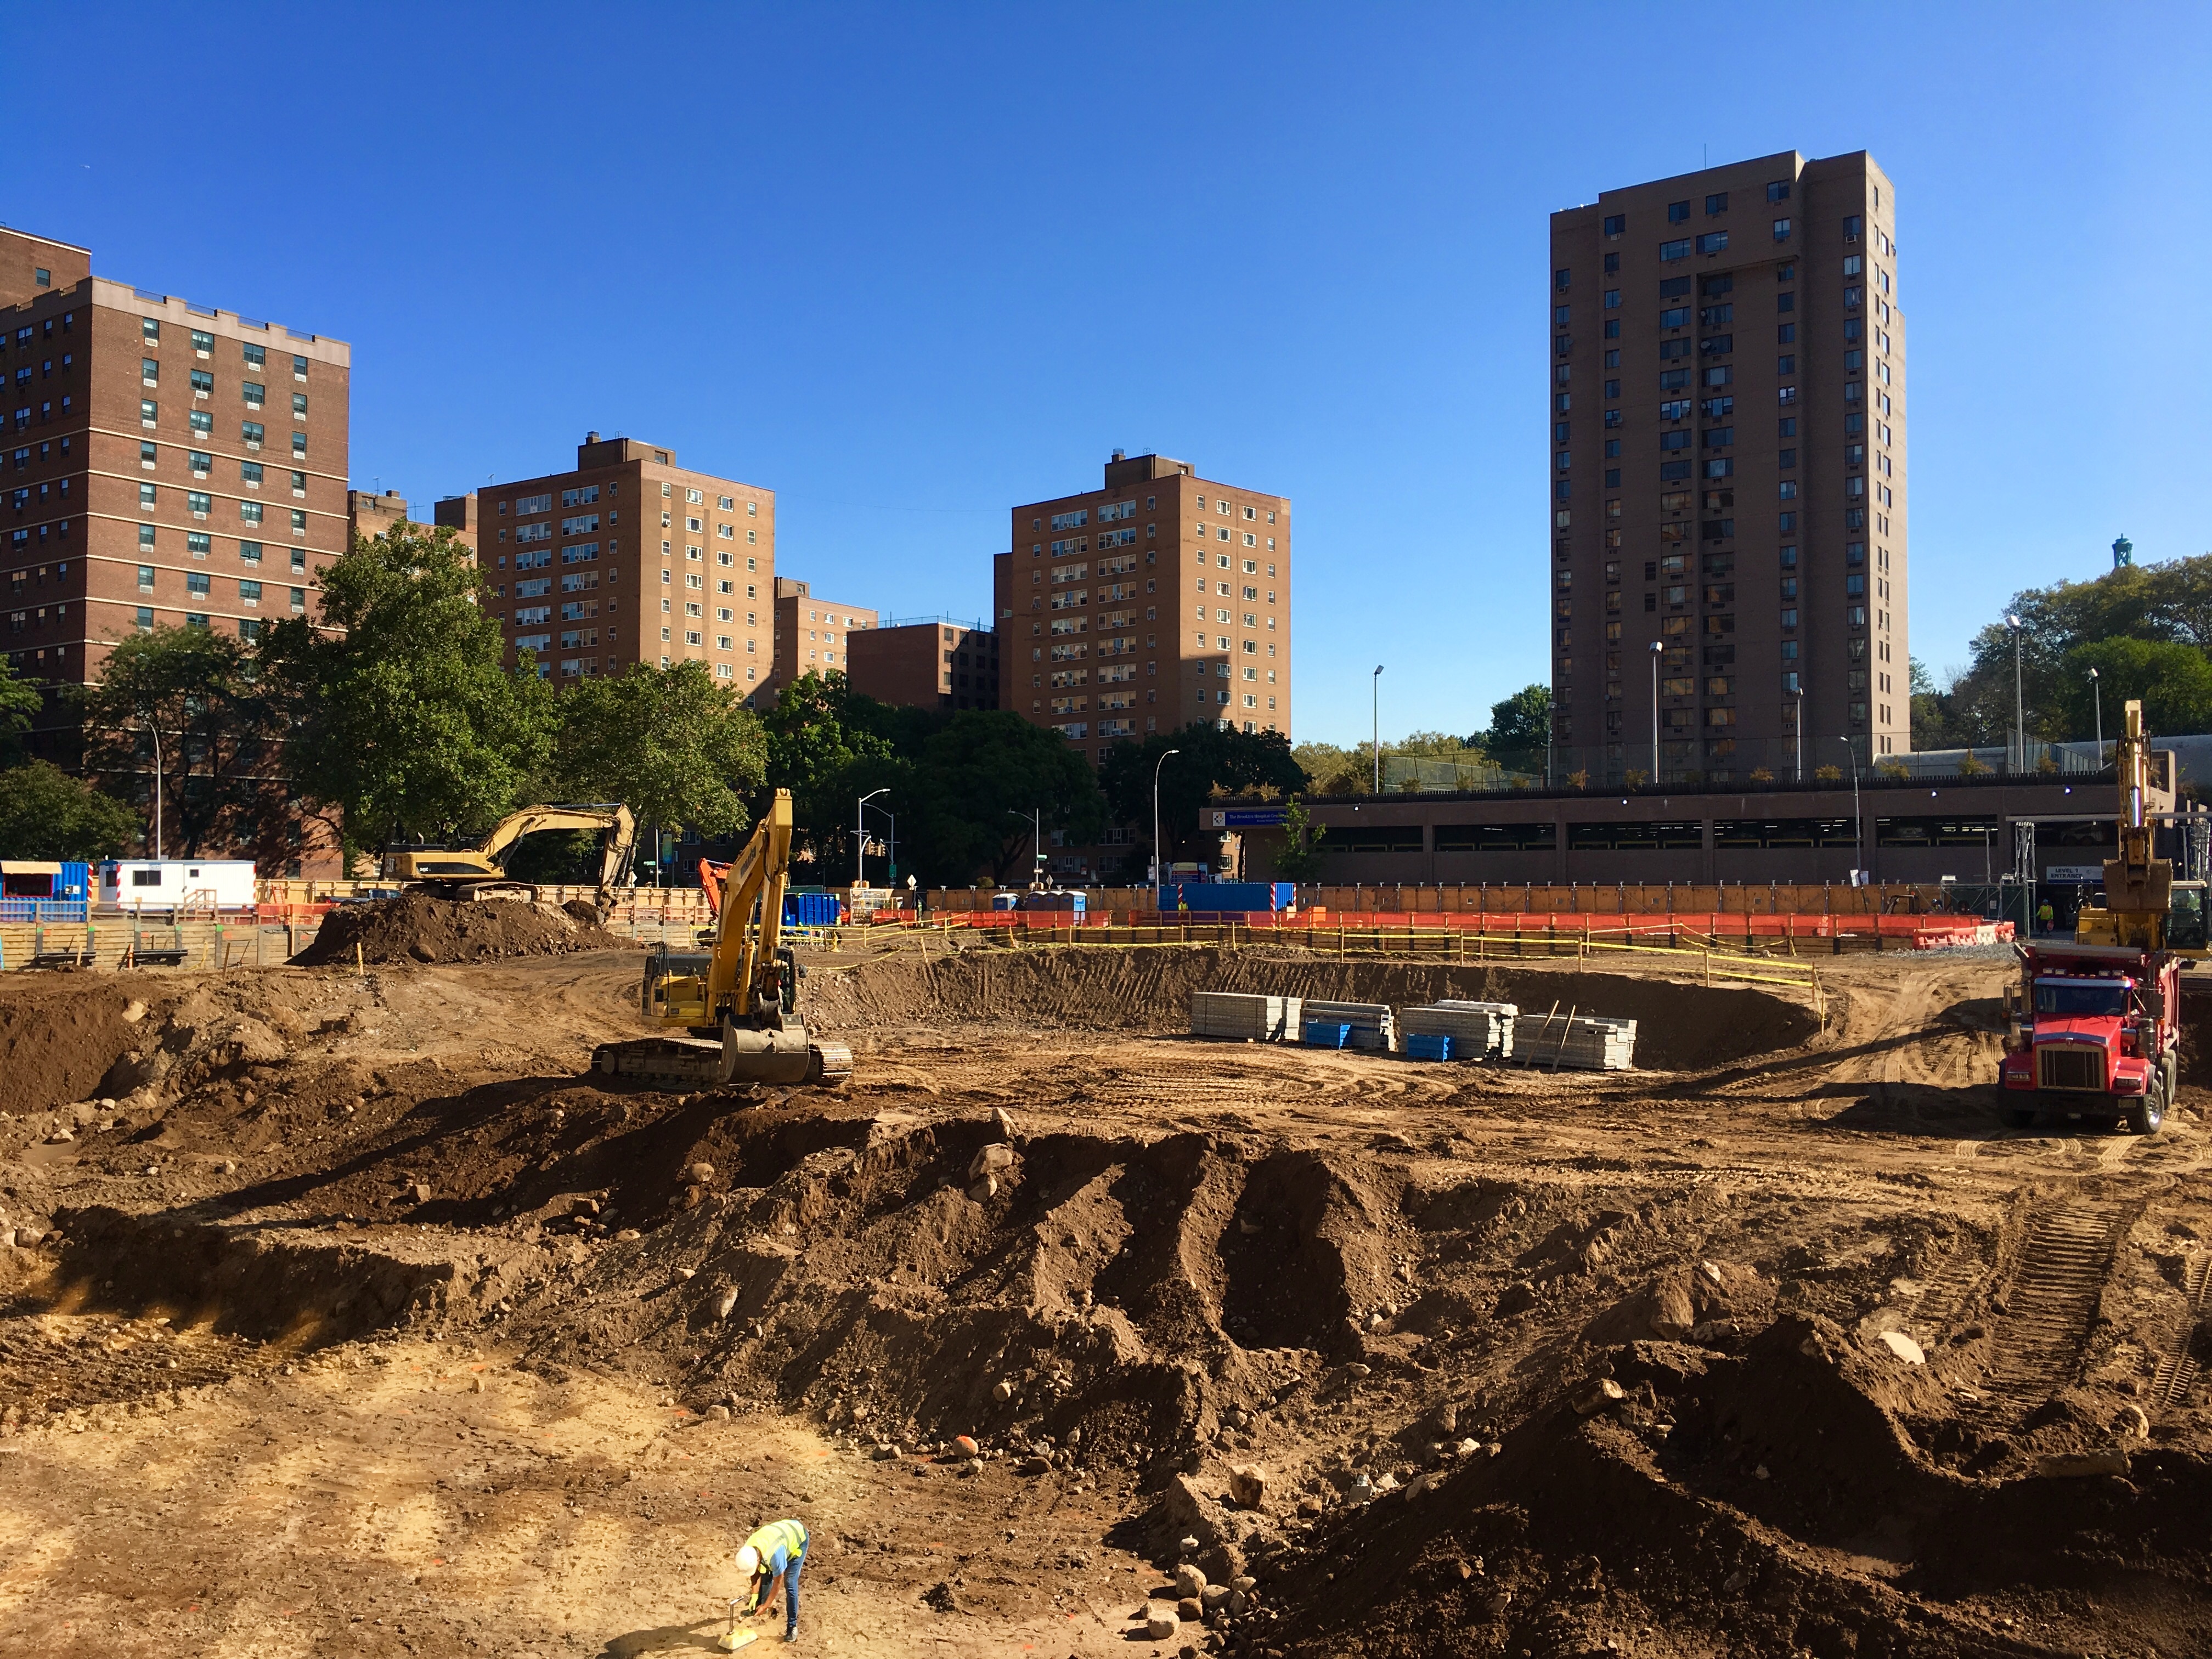 Excavation work is underway on the LIU campus site that RXR Realty is developing. Eagle photo by Lore Croghan